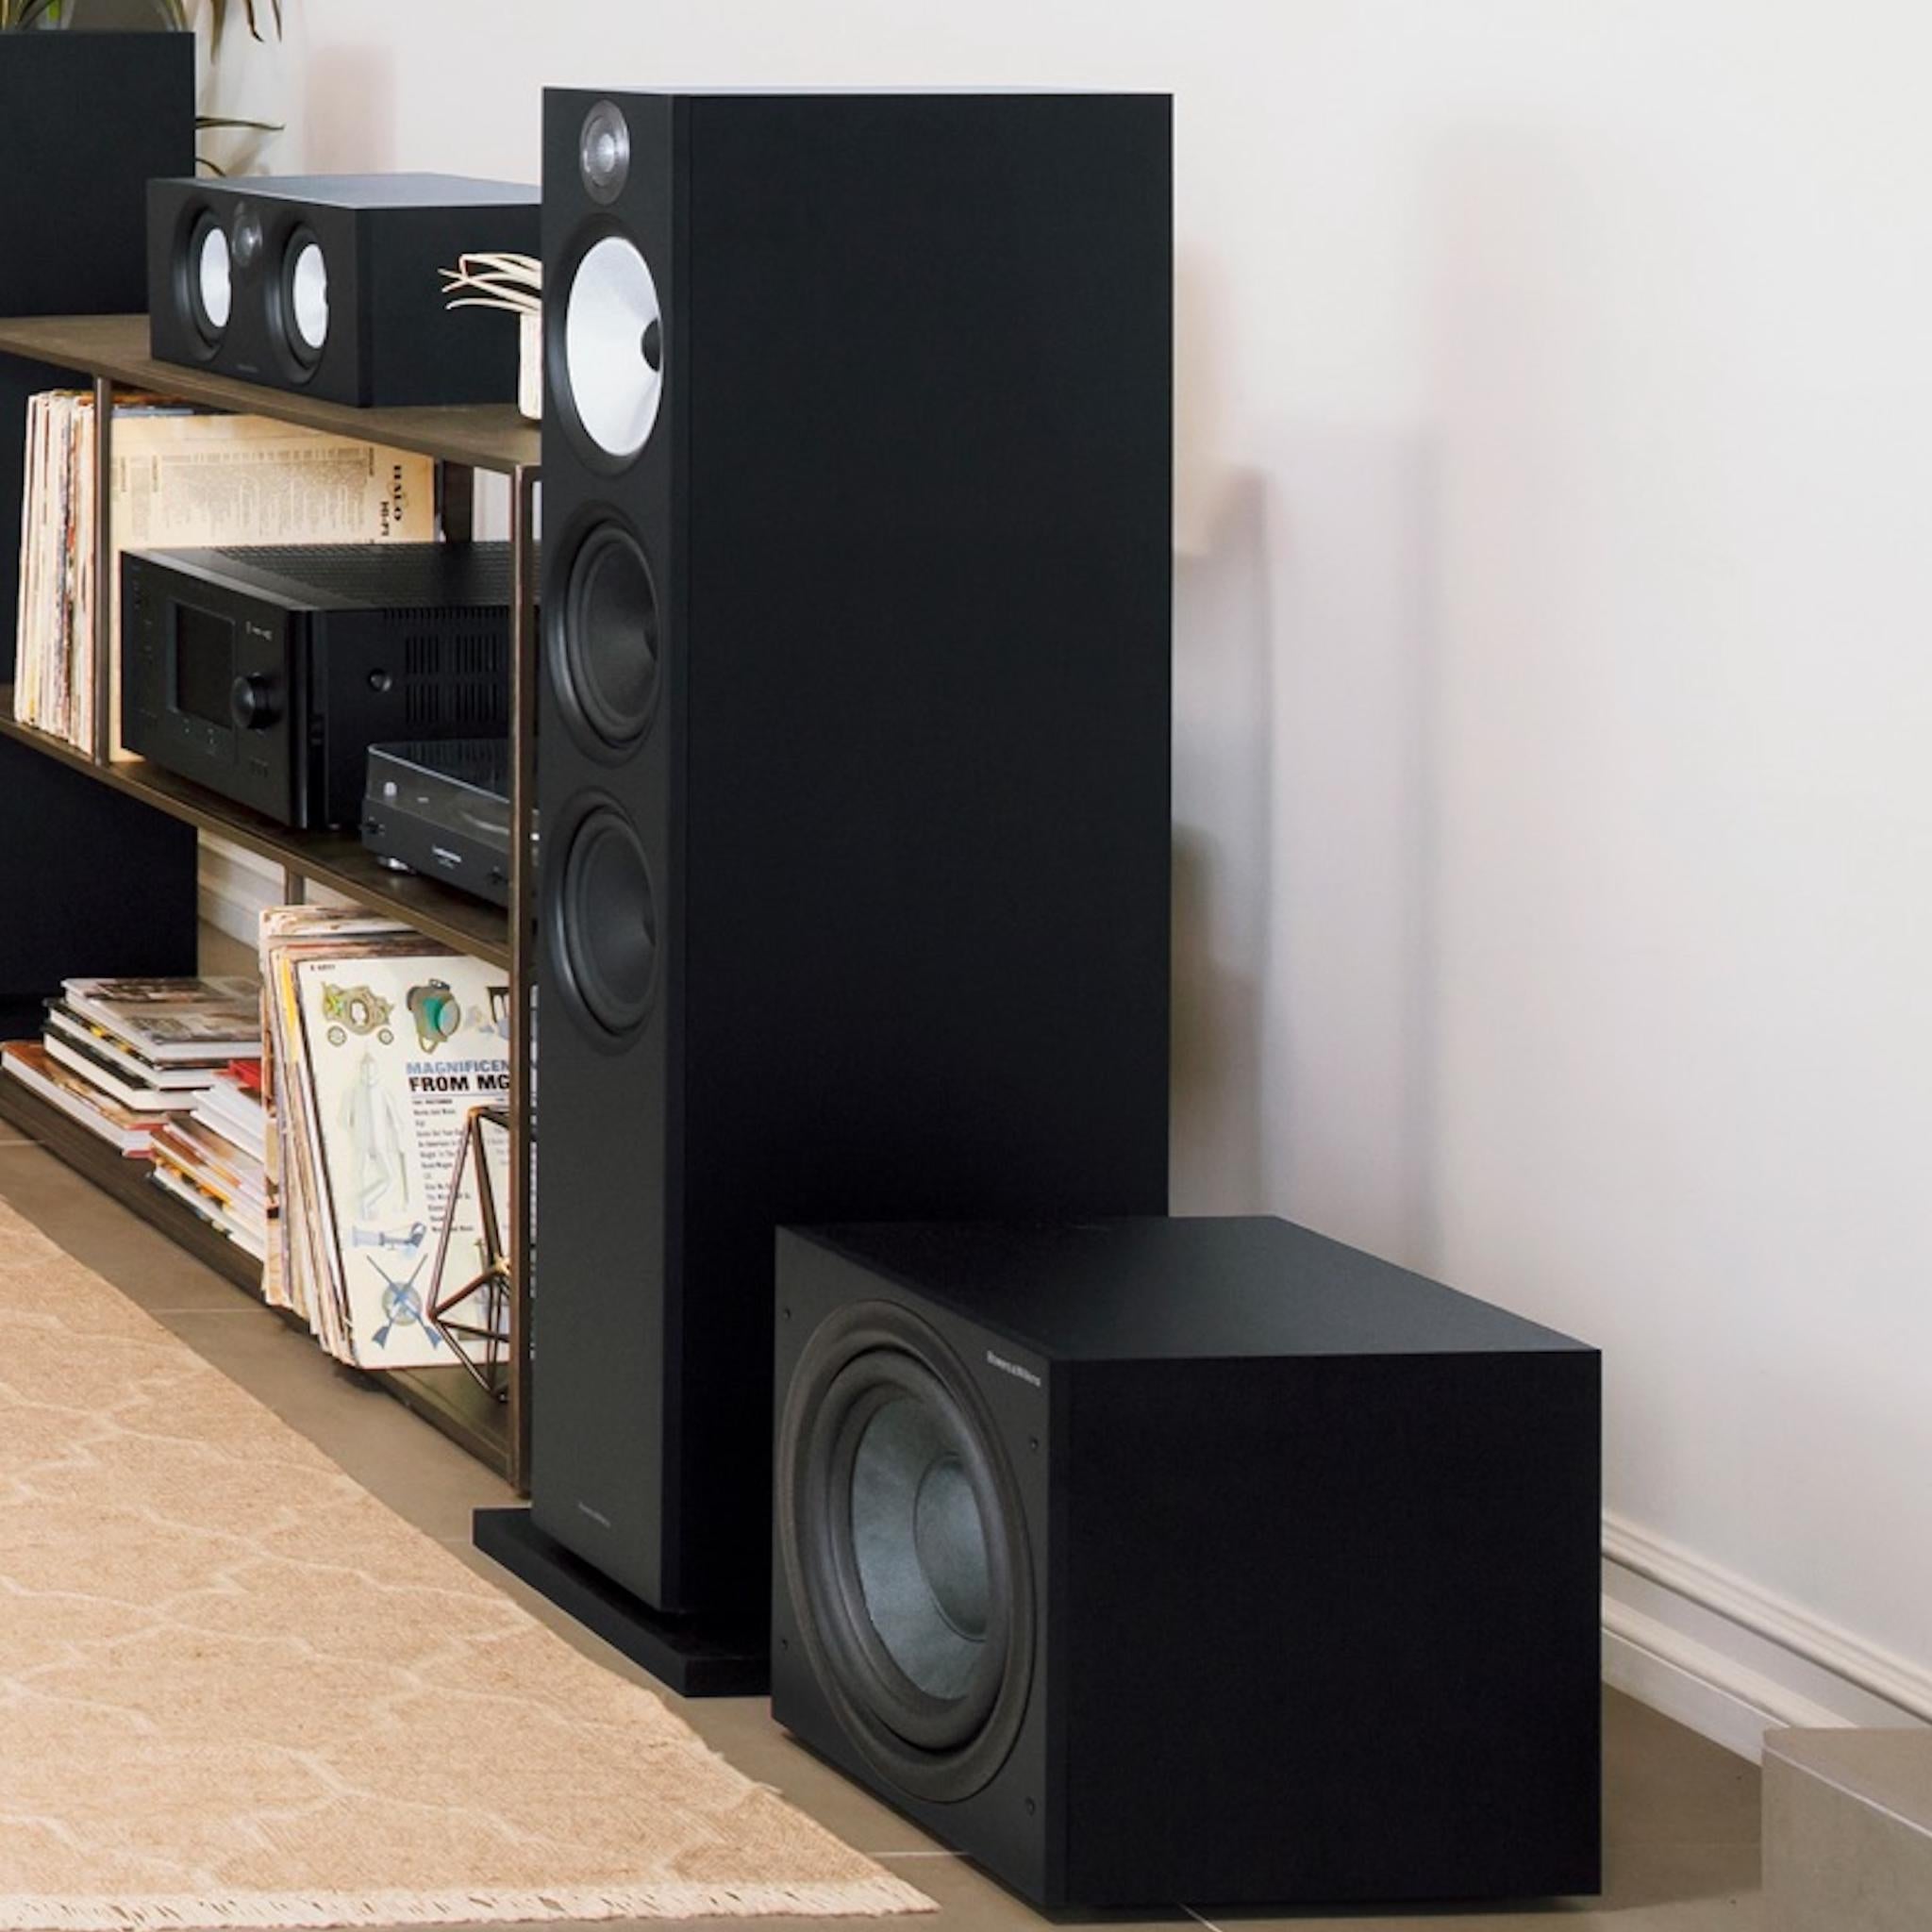 Bowers & Wilkins ASW610 - Powered Subwoofer - AVStore